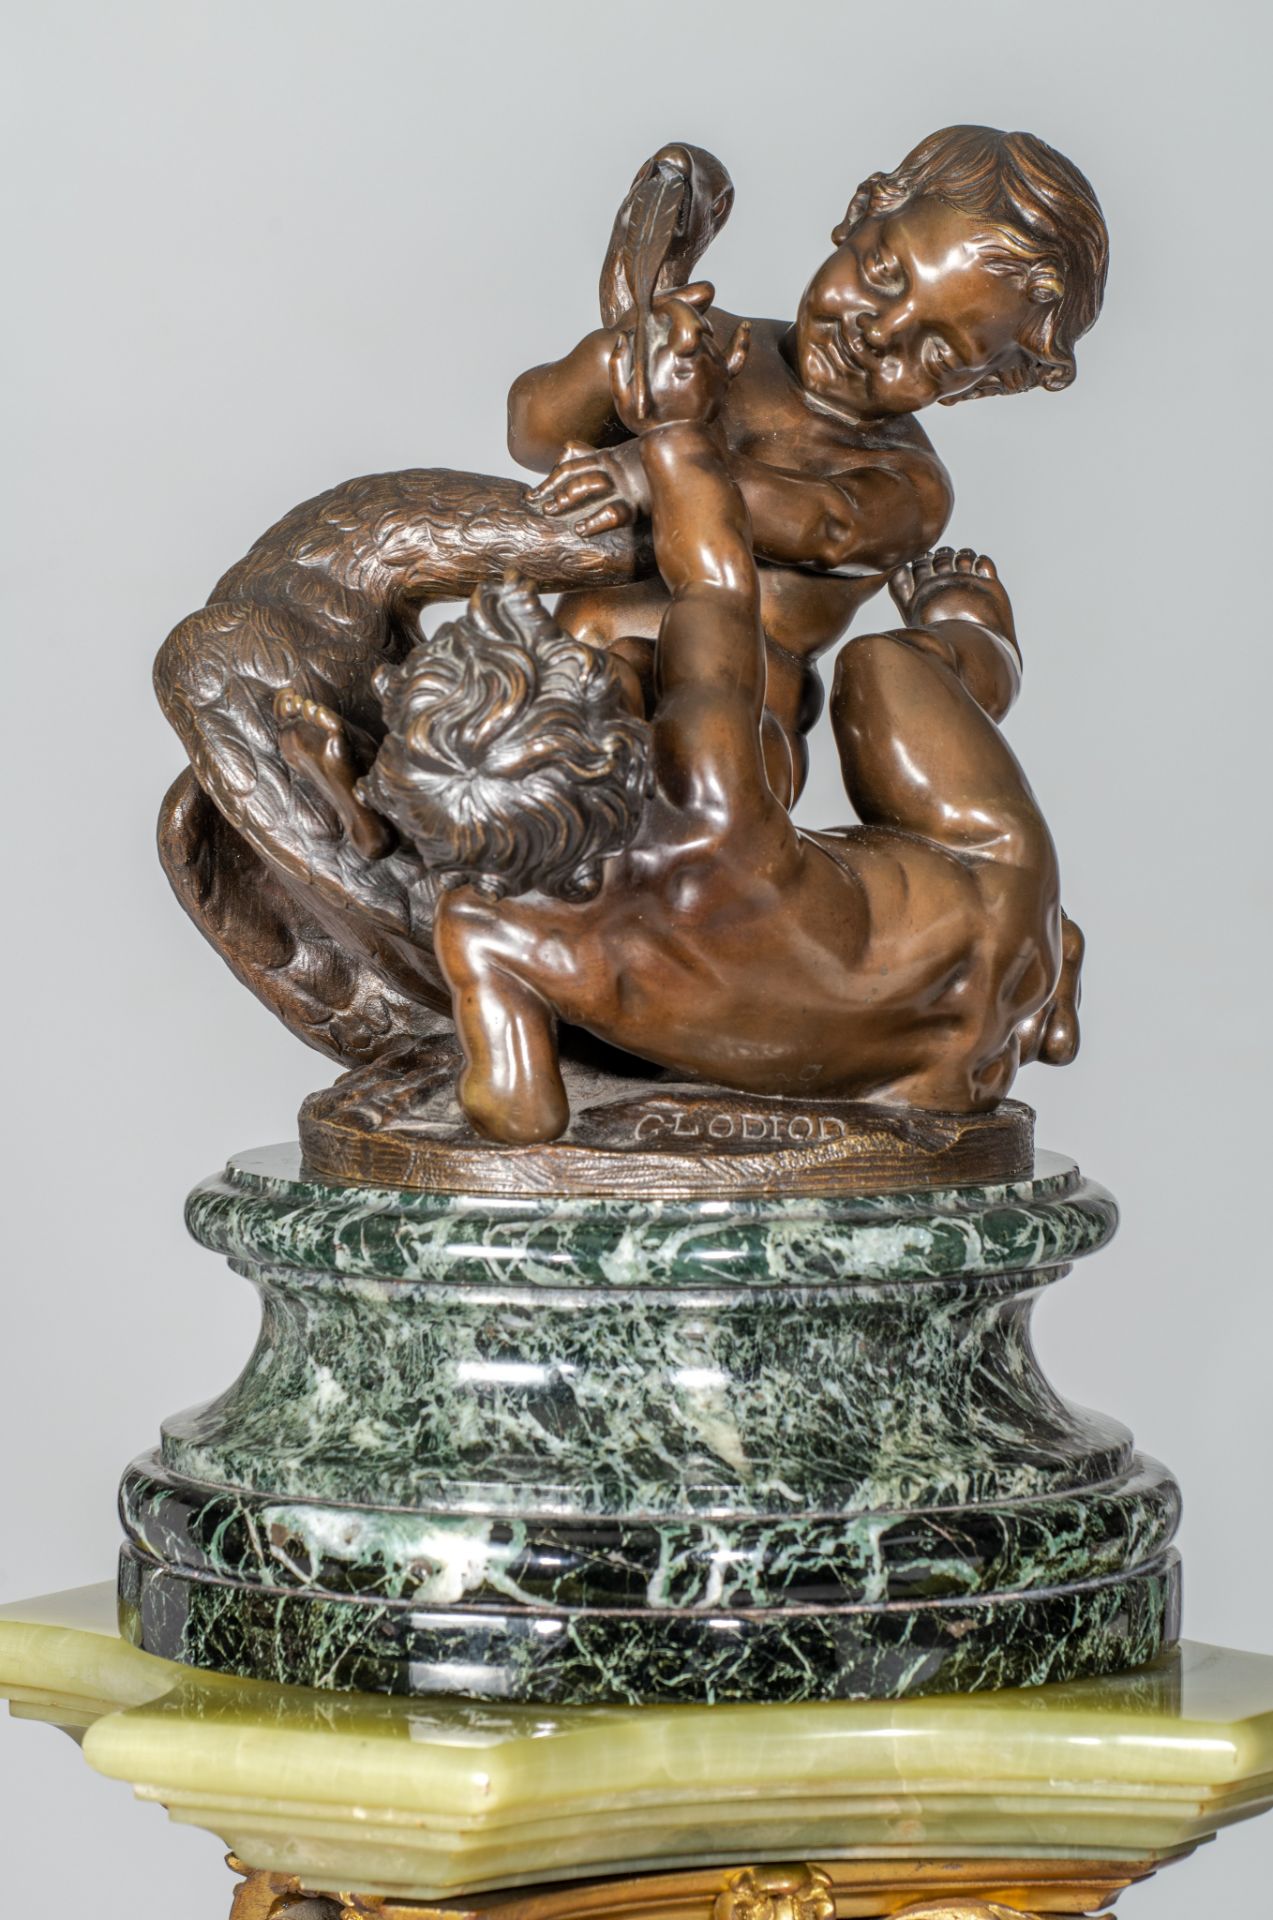 Clodion, putti playing with a swan, patinated bronze on a marble pedestal, H 145 cm (total height) - Image 7 of 18